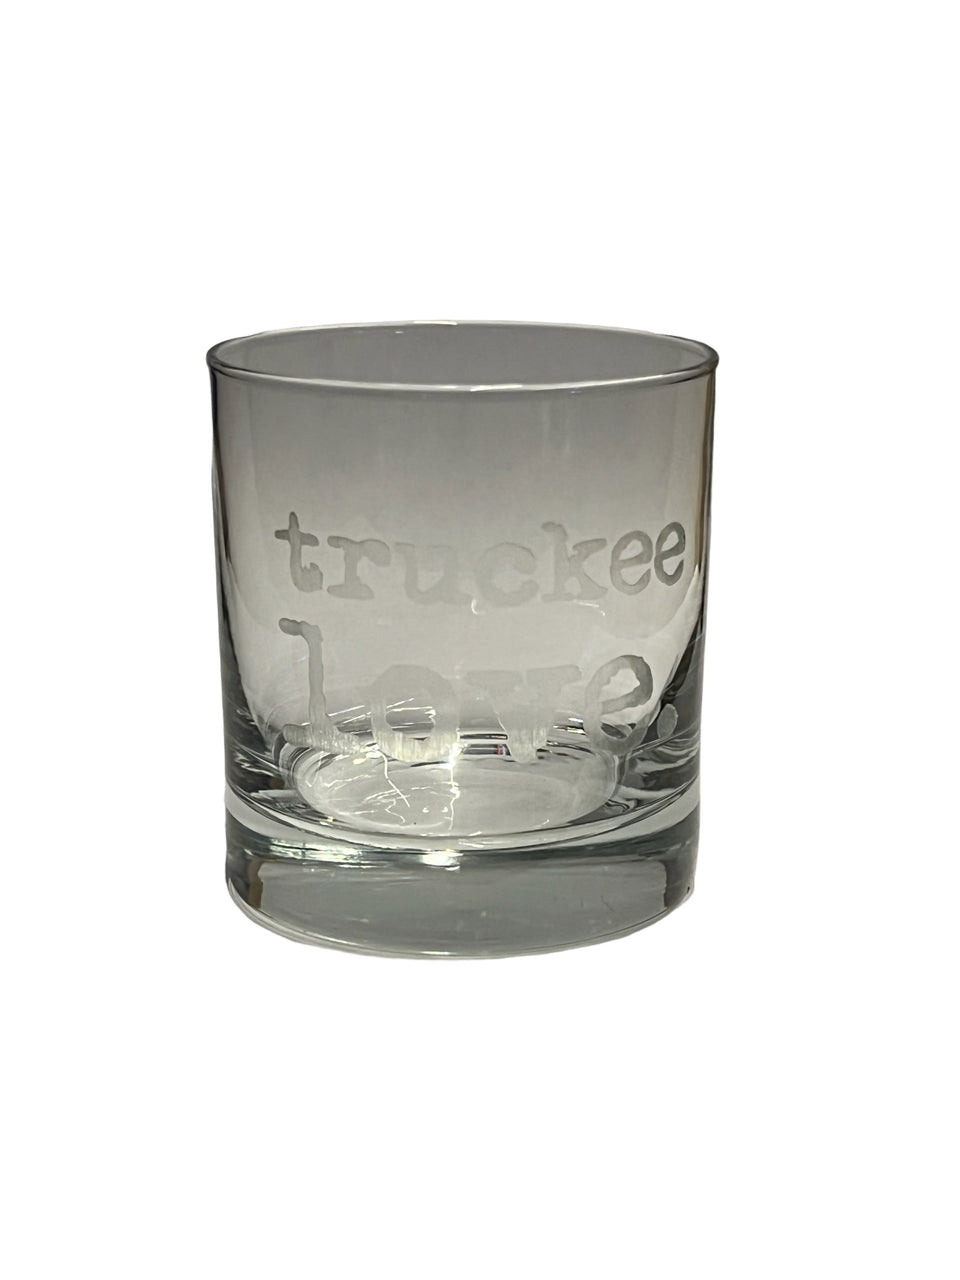 truckee love. etched rocks glass